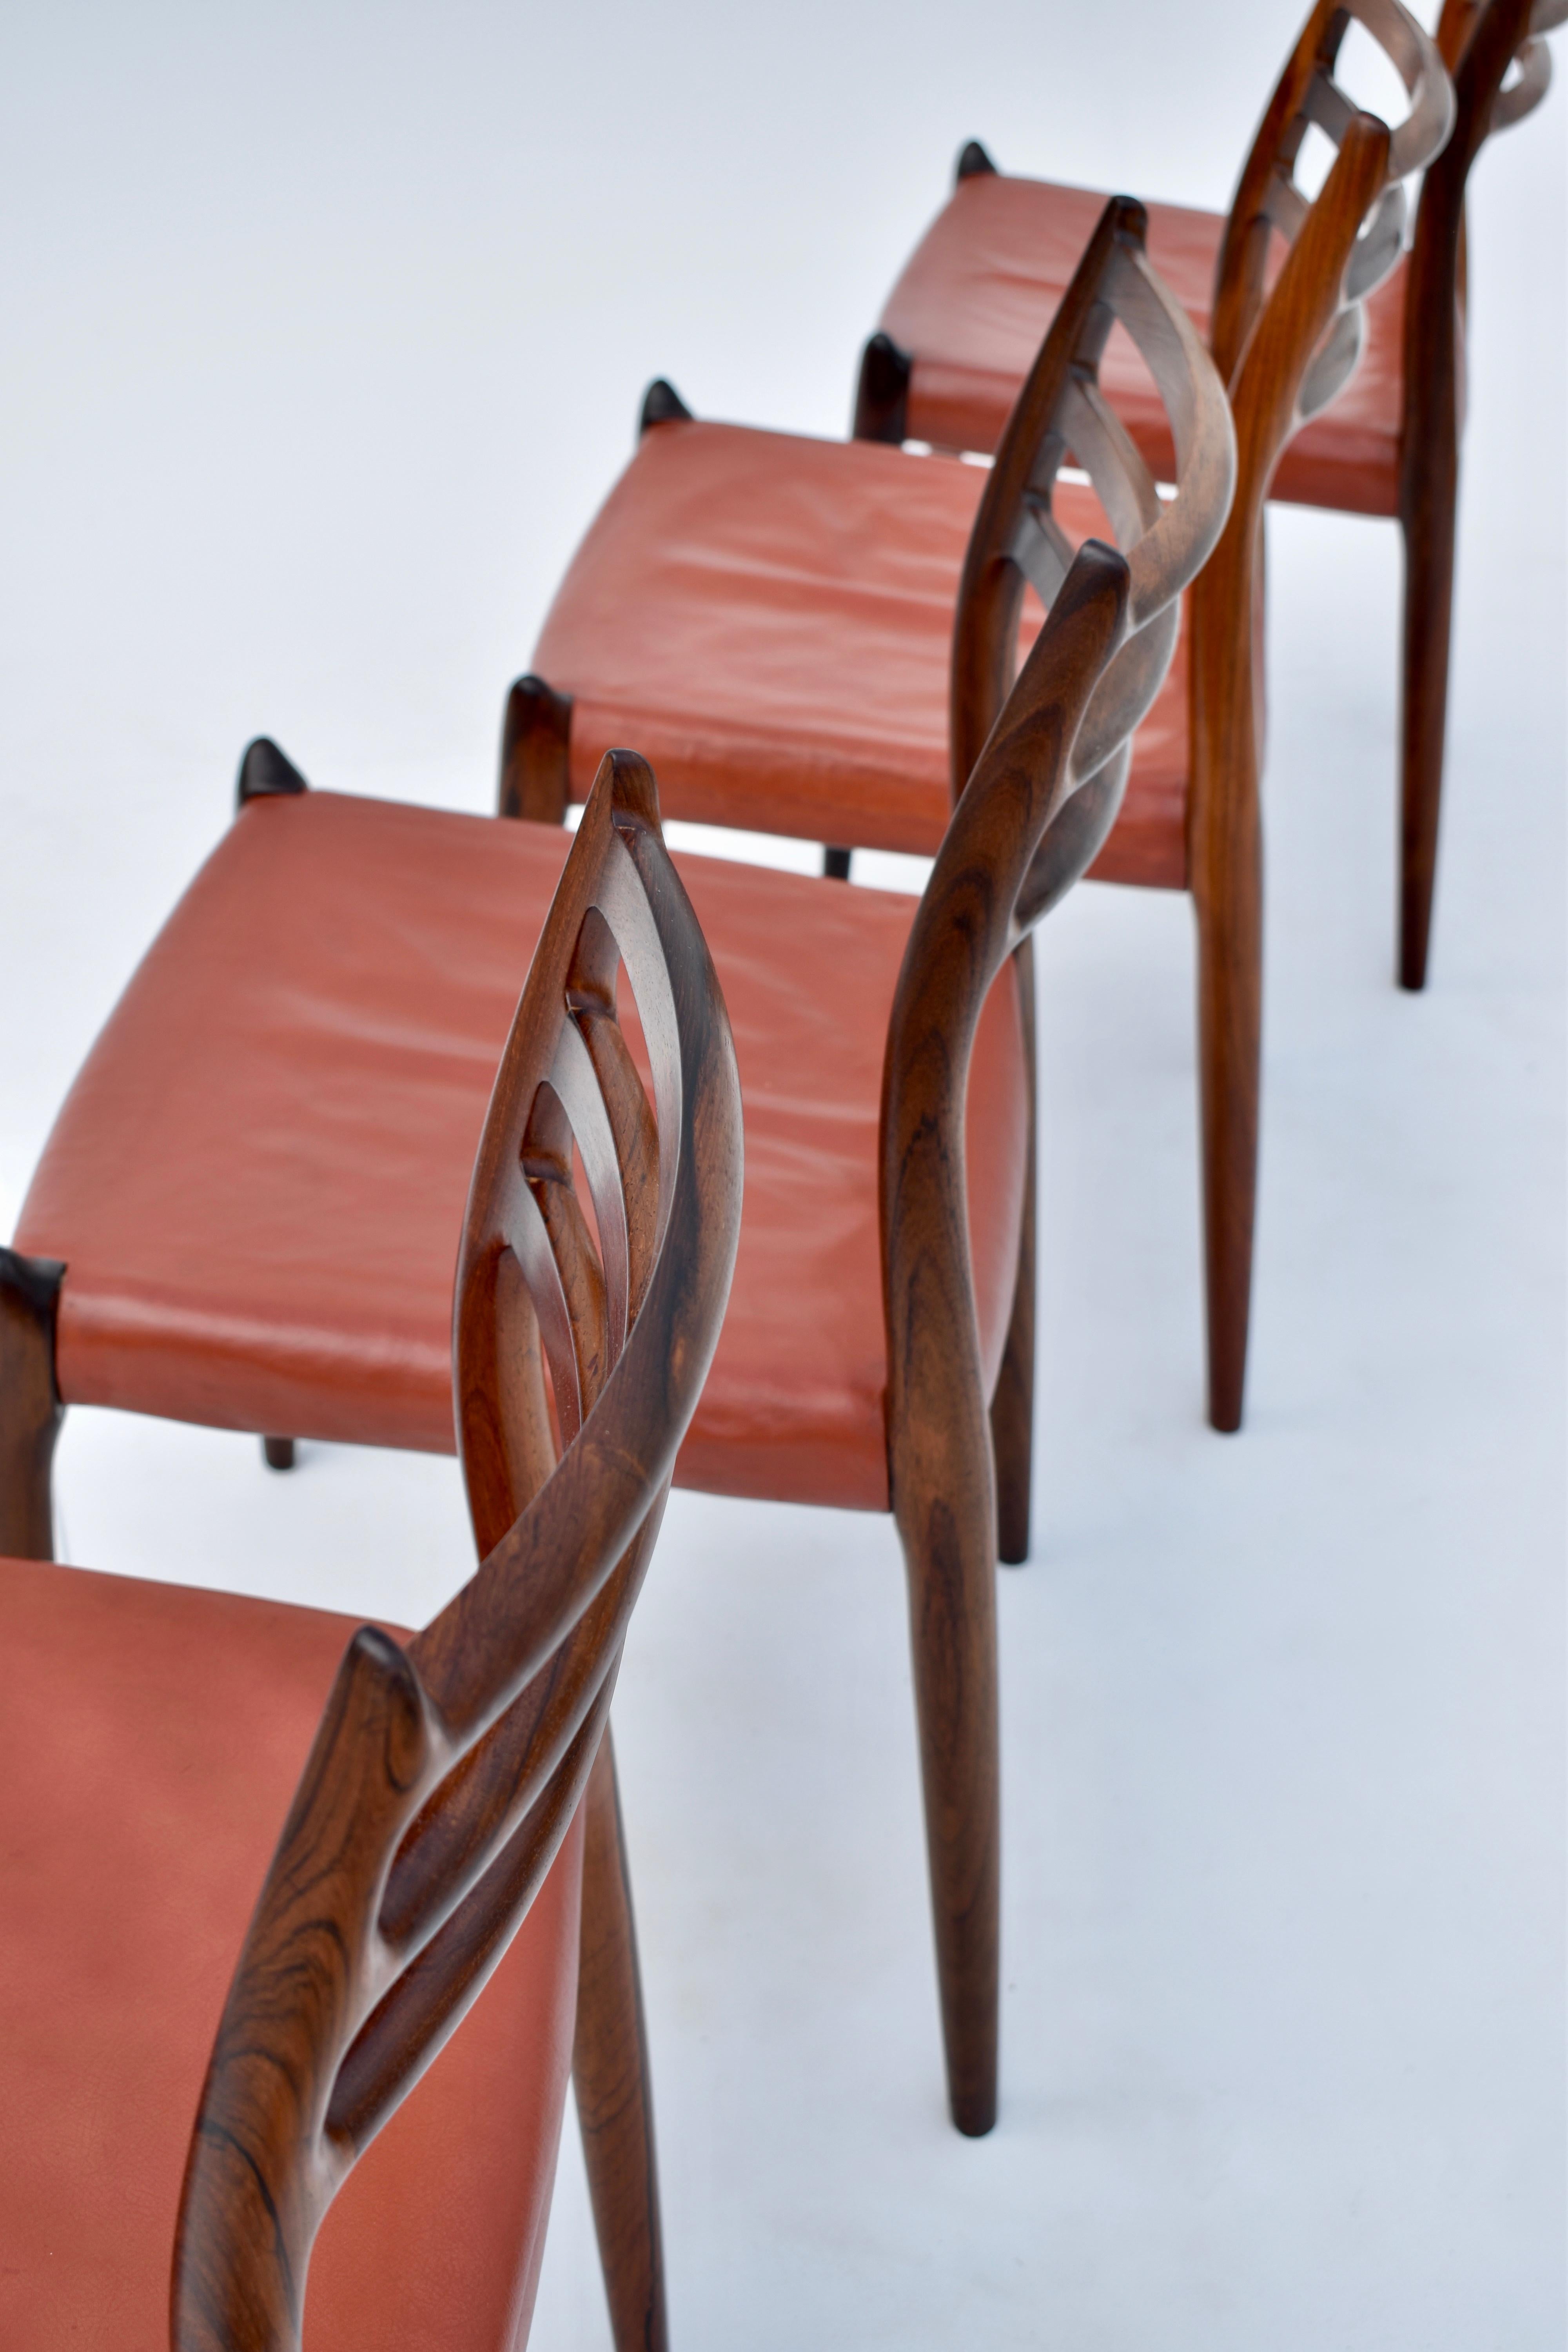 A superb set of four Brazilian rosewood chairs designed in 1962 by Niels Moller and produced by J.L Mollers Mobelfabrik.

Considered to be Niels Mollers finest work this design has rightly become a Danish design Classic.

This is an absolutely